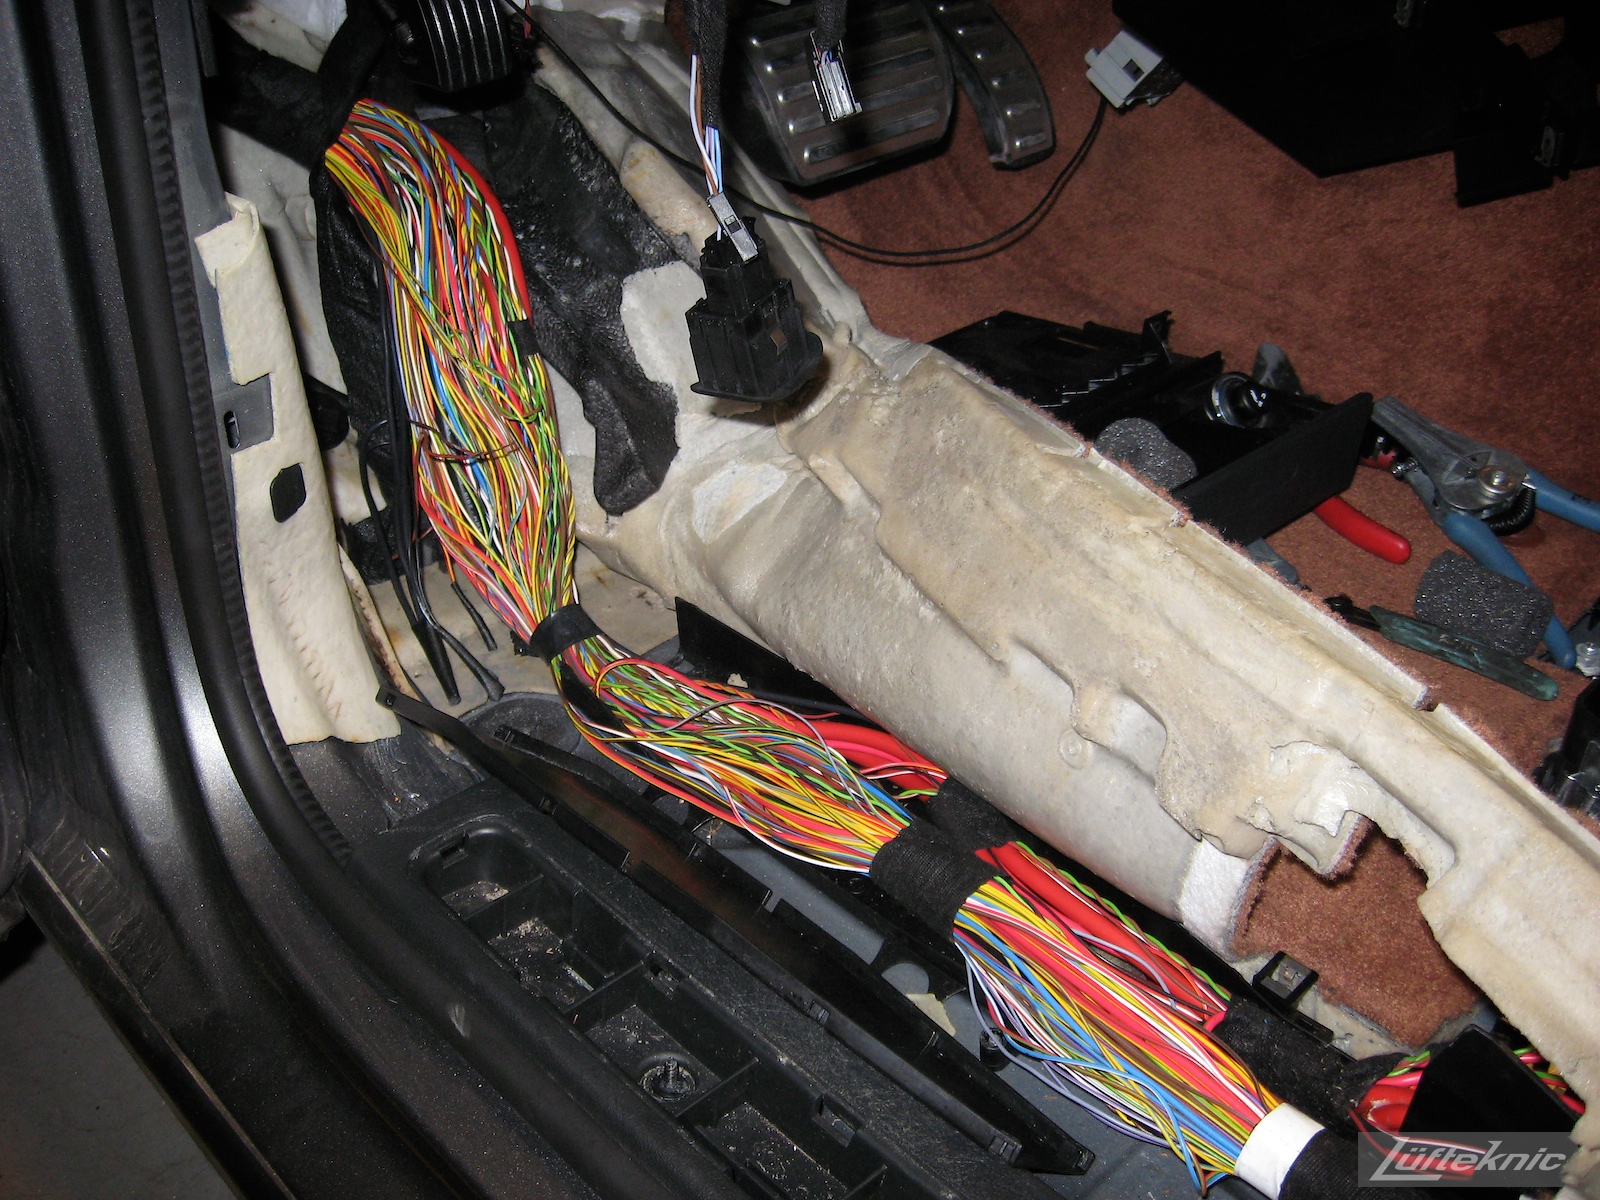 The carpet pulled aside with a large bundle of exposed wires inside the cabin of a Porsche Cayenne.